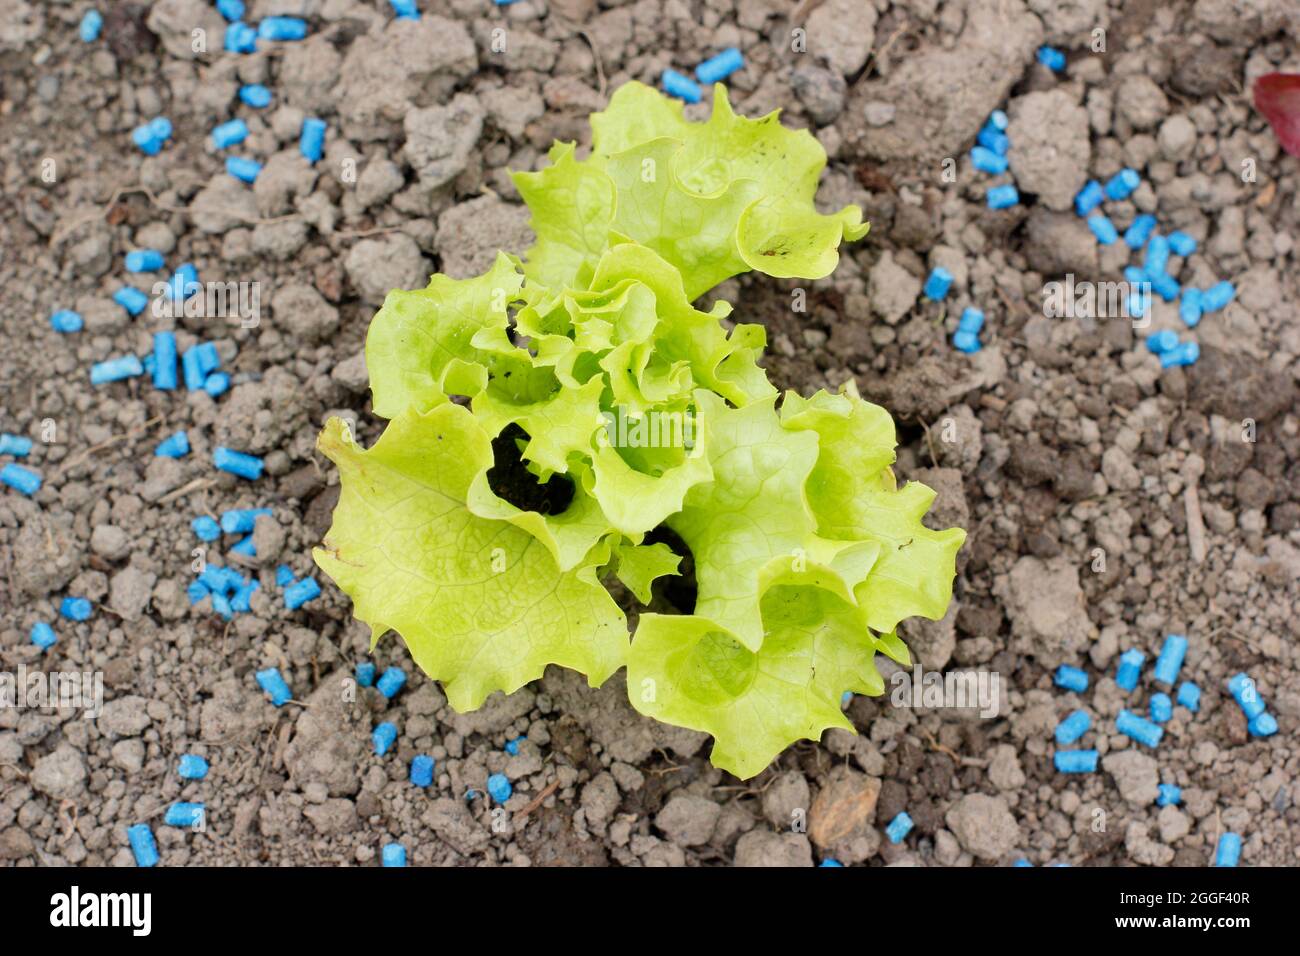 Slug pellets. Ferric phosphate slug pellets next to young lettuce plants to help prevent slugs and snails from attacking crops. UK Stock Photo